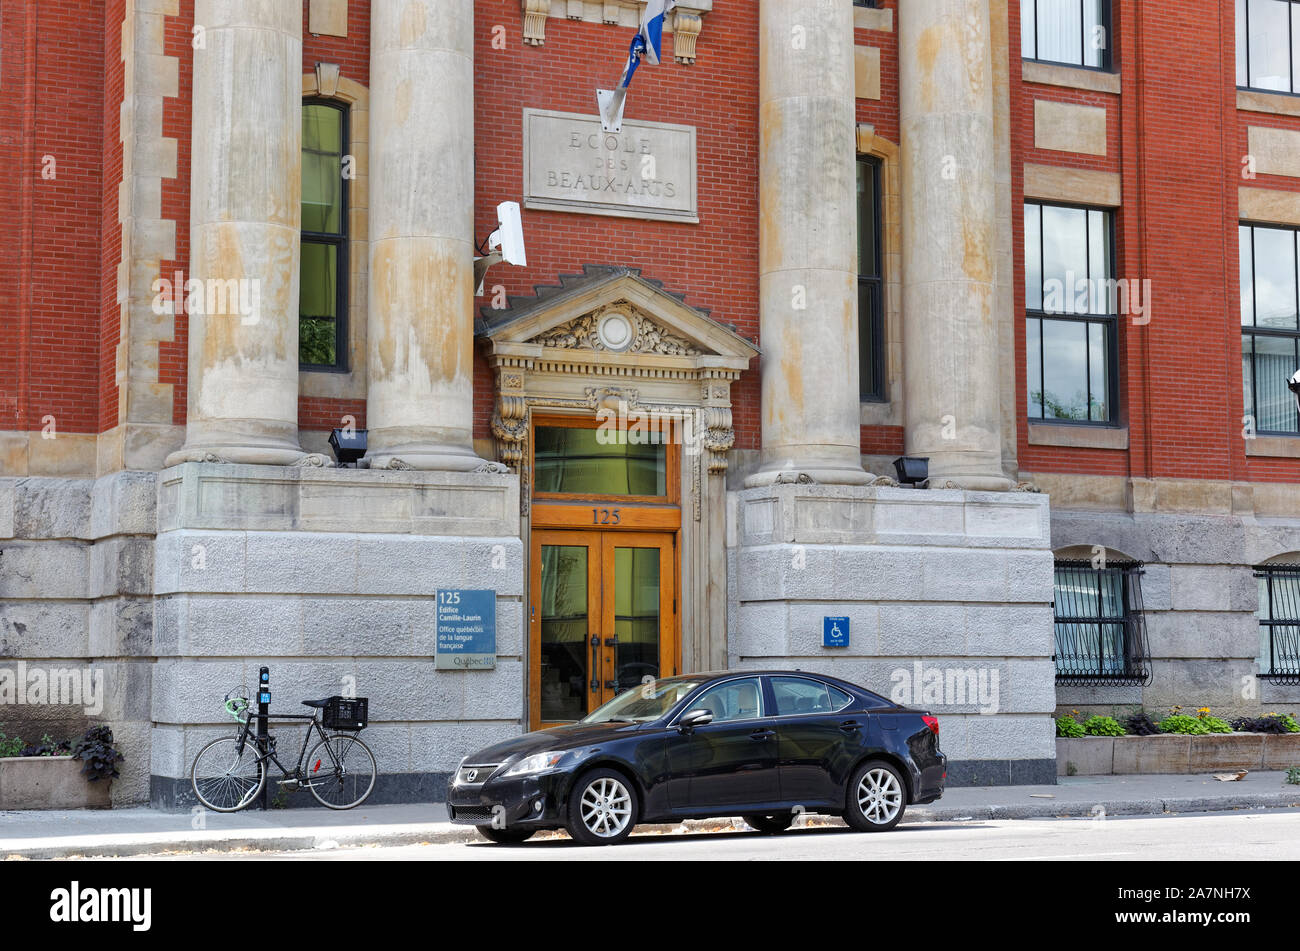 Quebec,Canada. Entrance to the Ecole des Beaux-Arts art school in downtown Montreal Stock Photo